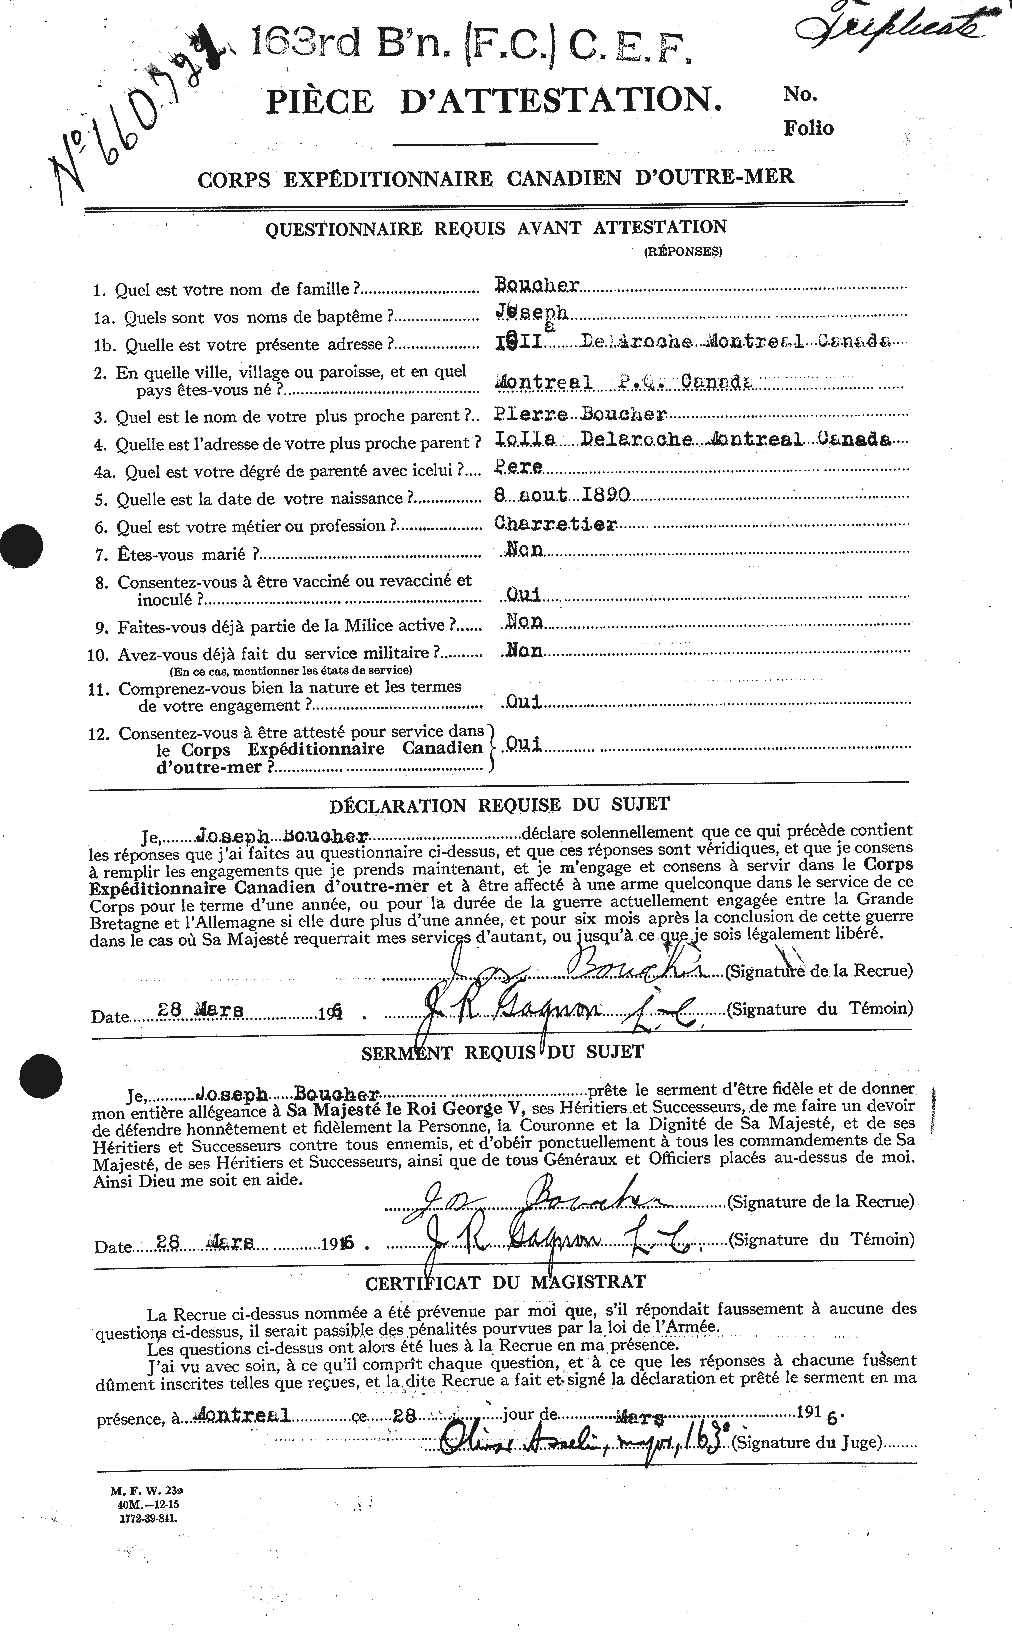 Personnel Records of the First World War - CEF 255505a